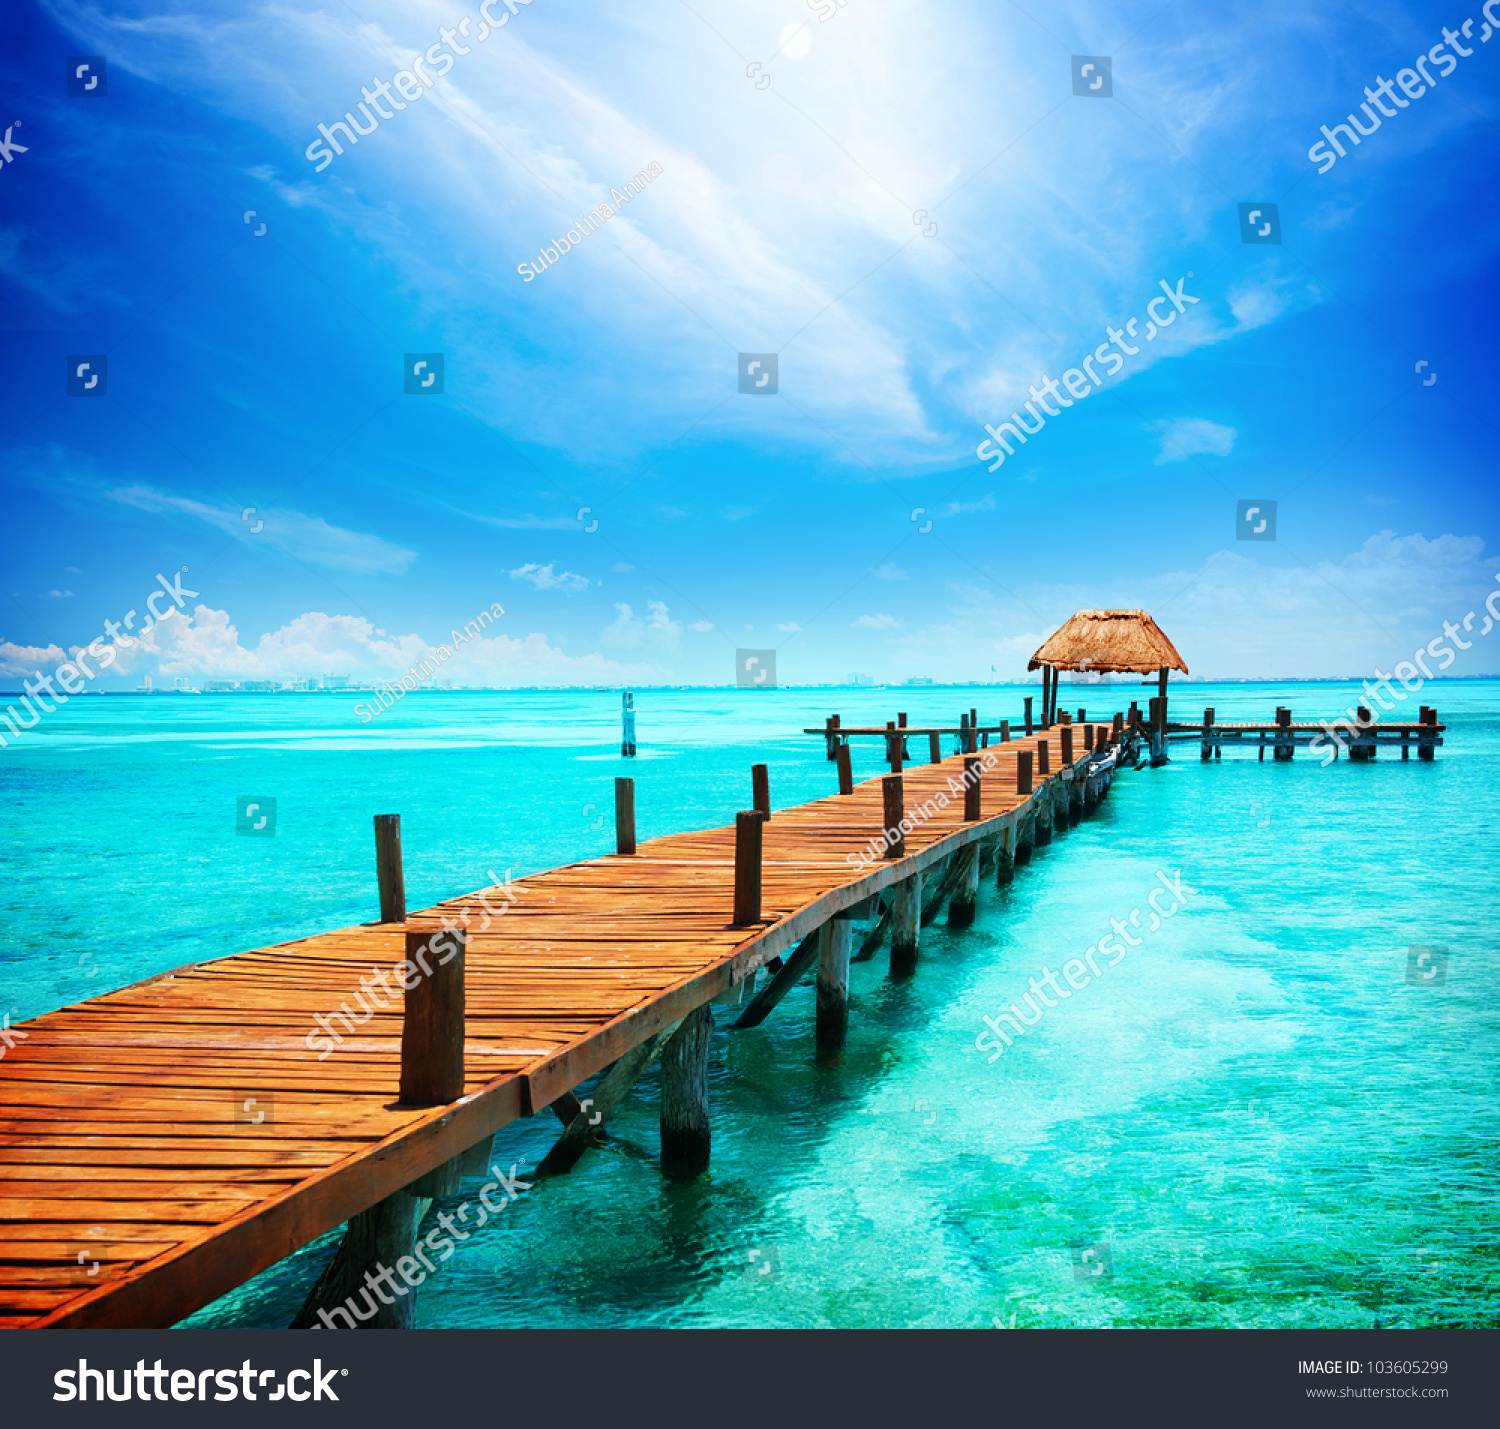 Paradise. Vacations And Tourism Concept. Tropical Resort. Jetty on Isla Mujeres, Mexico,Cancun #103605299